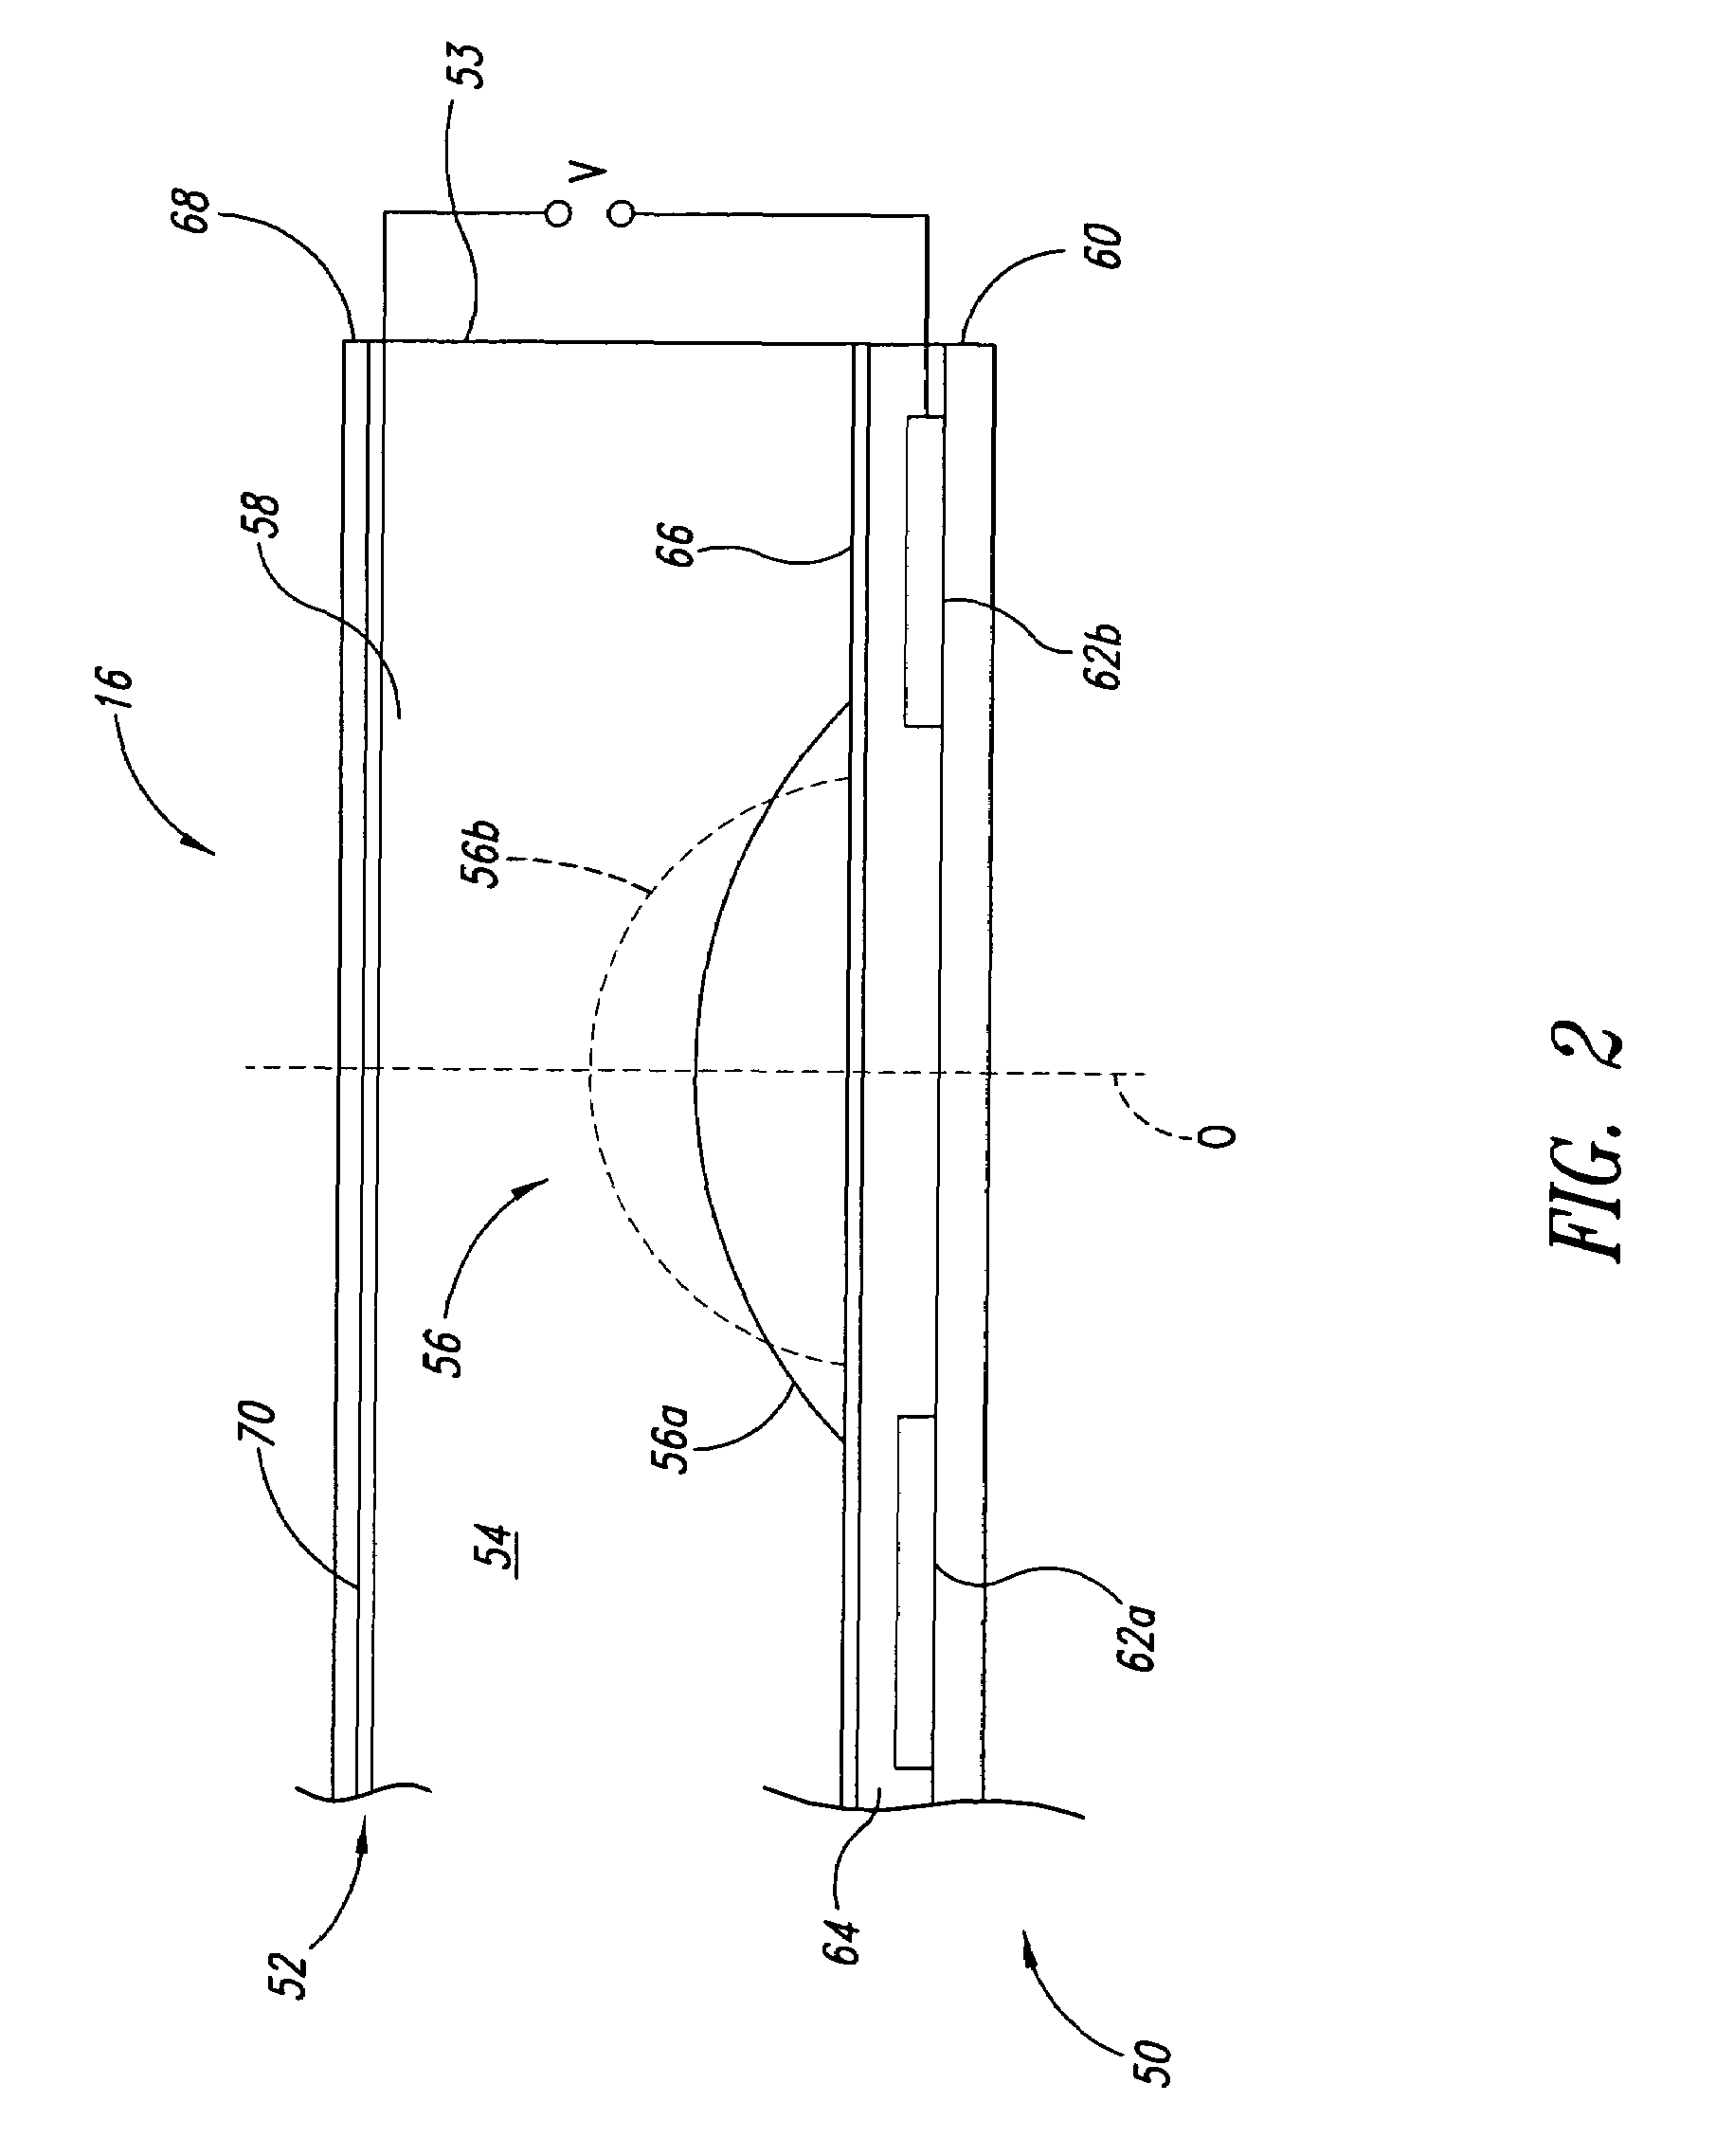 Autofocus barcode scanner and the like employing micro-fluidic lens